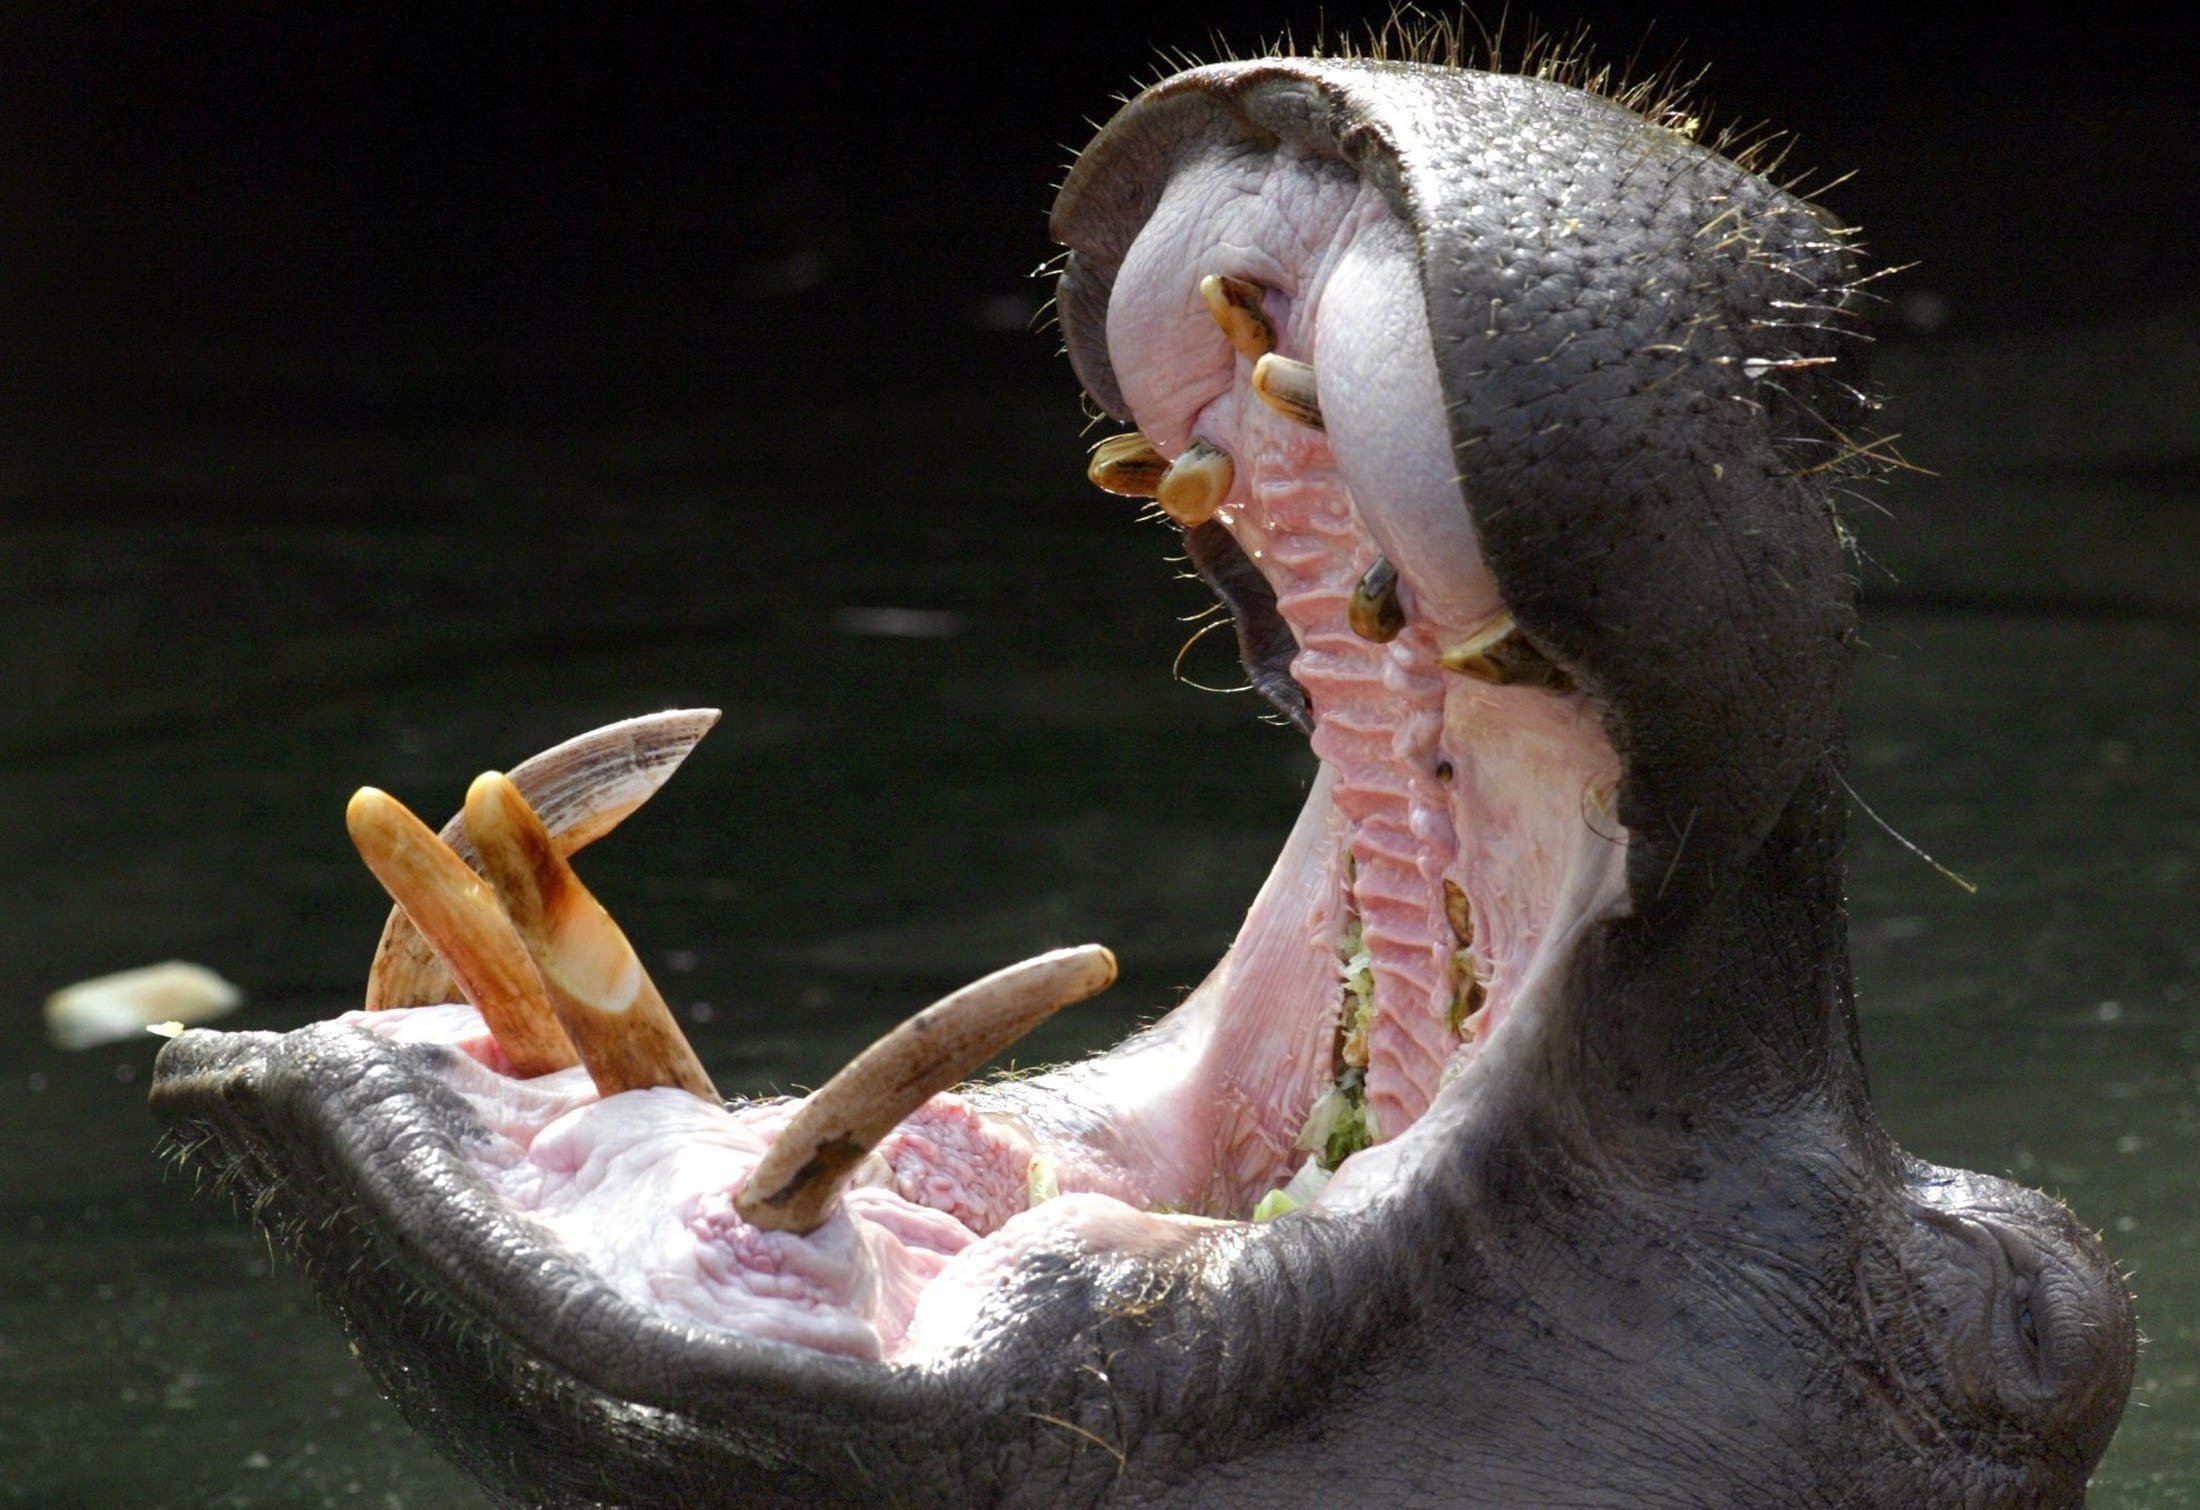 A hippopotamus awaits feeding with his mouth wide open in Hanover Zoo, Germany, Sept. 6, 2002. (DPA)